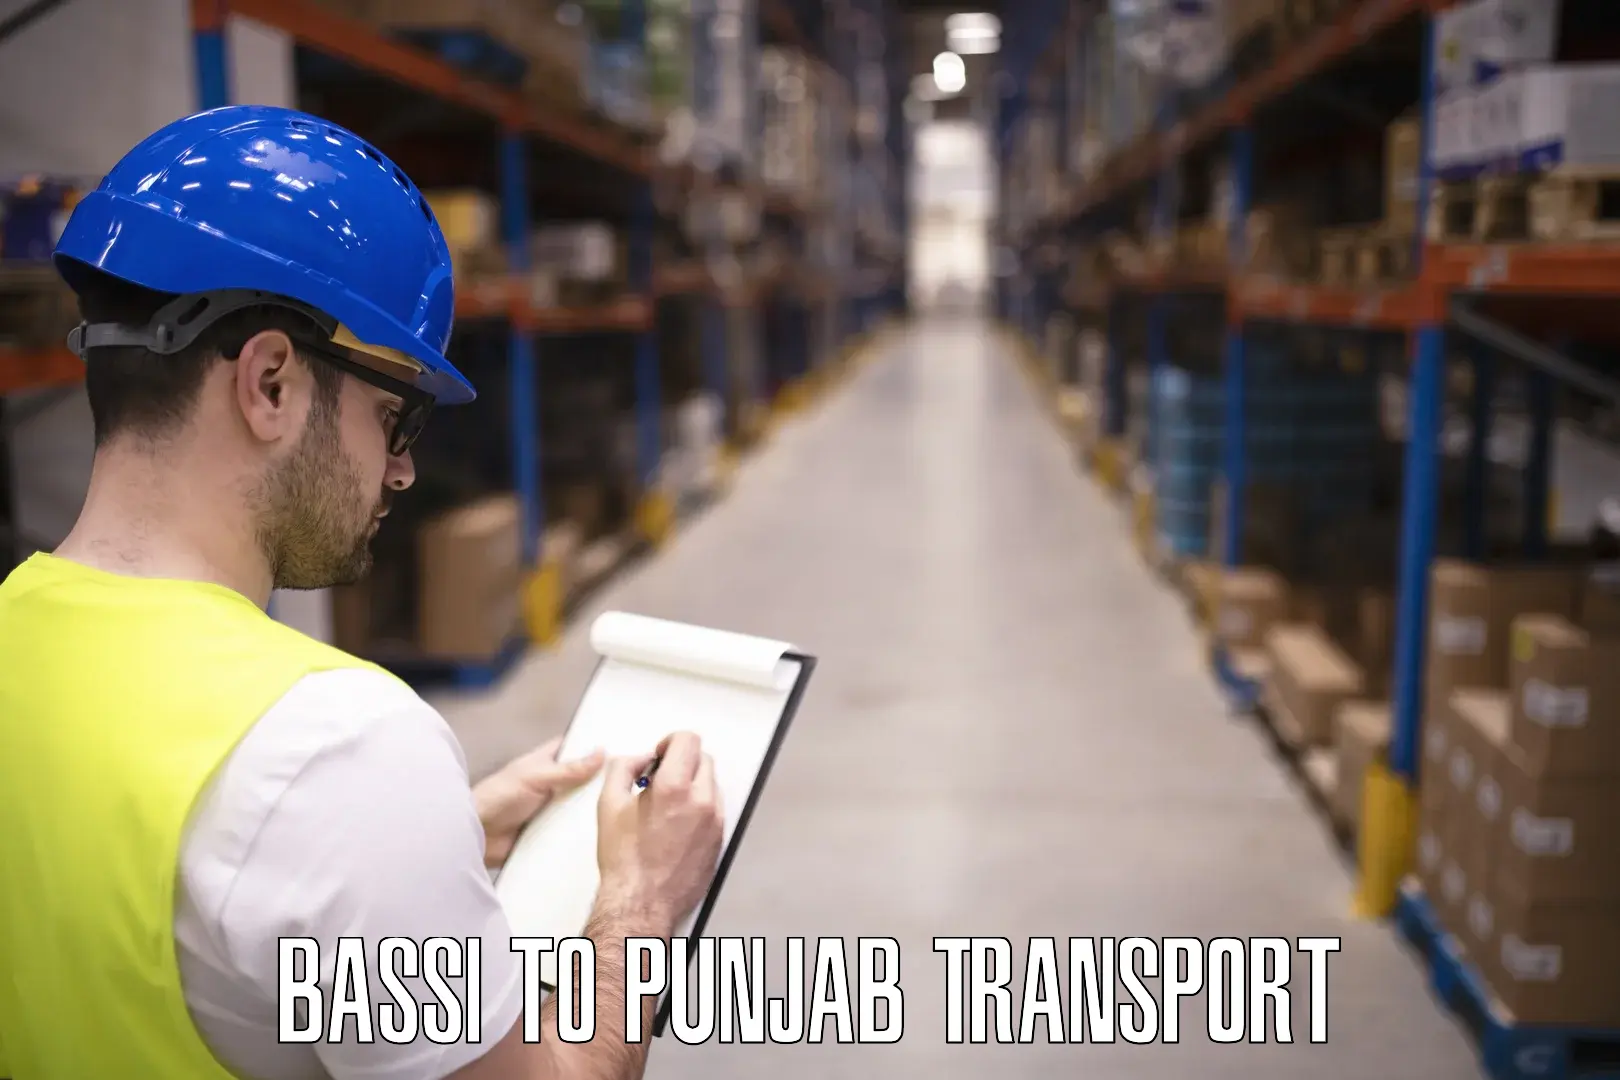 Domestic transport services Bassi to Punjab